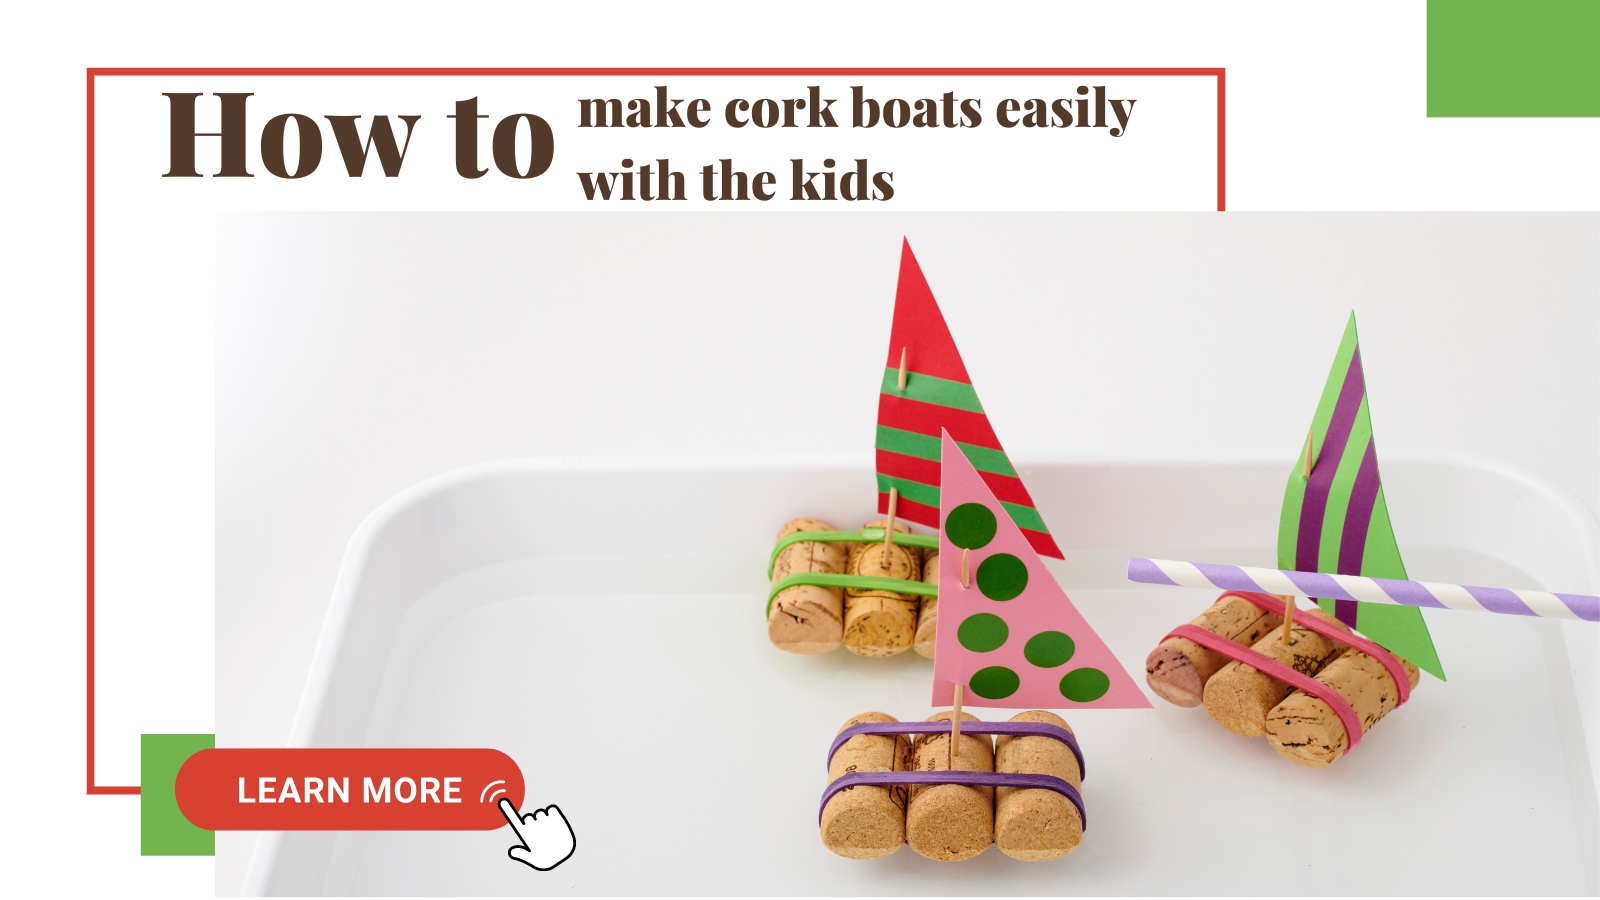 DIY Cork boats: Sail away with this simple homemade craft